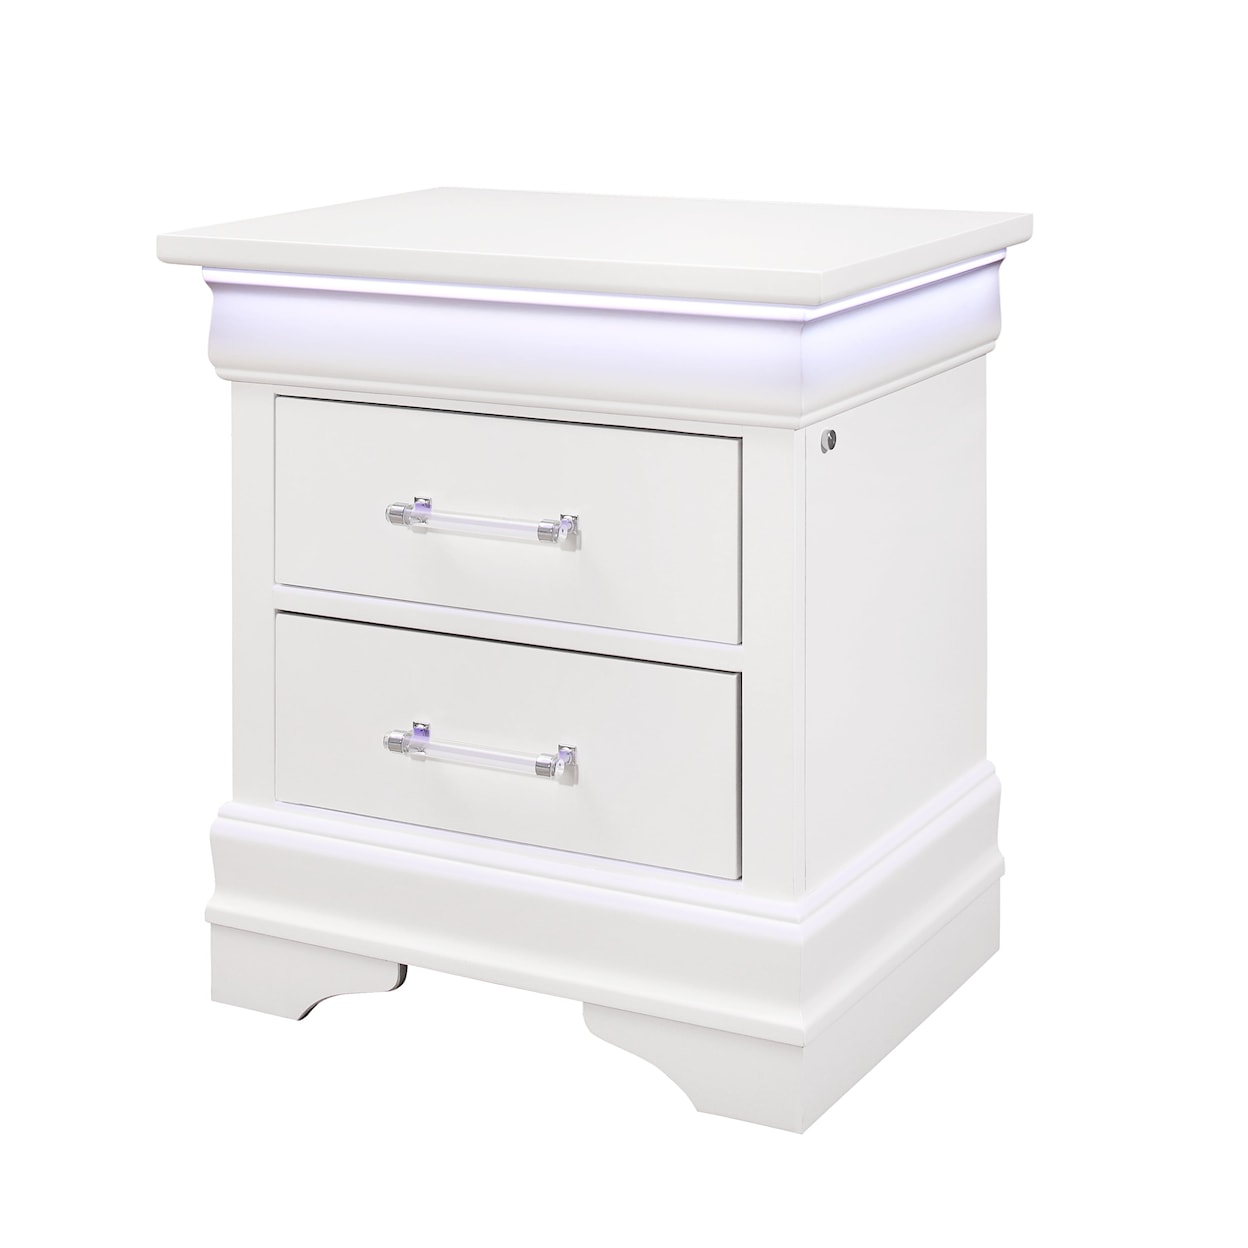 Global Furniture Light Up Louie LIGHT UP LOUIE WHITE NIGHTSTAND |